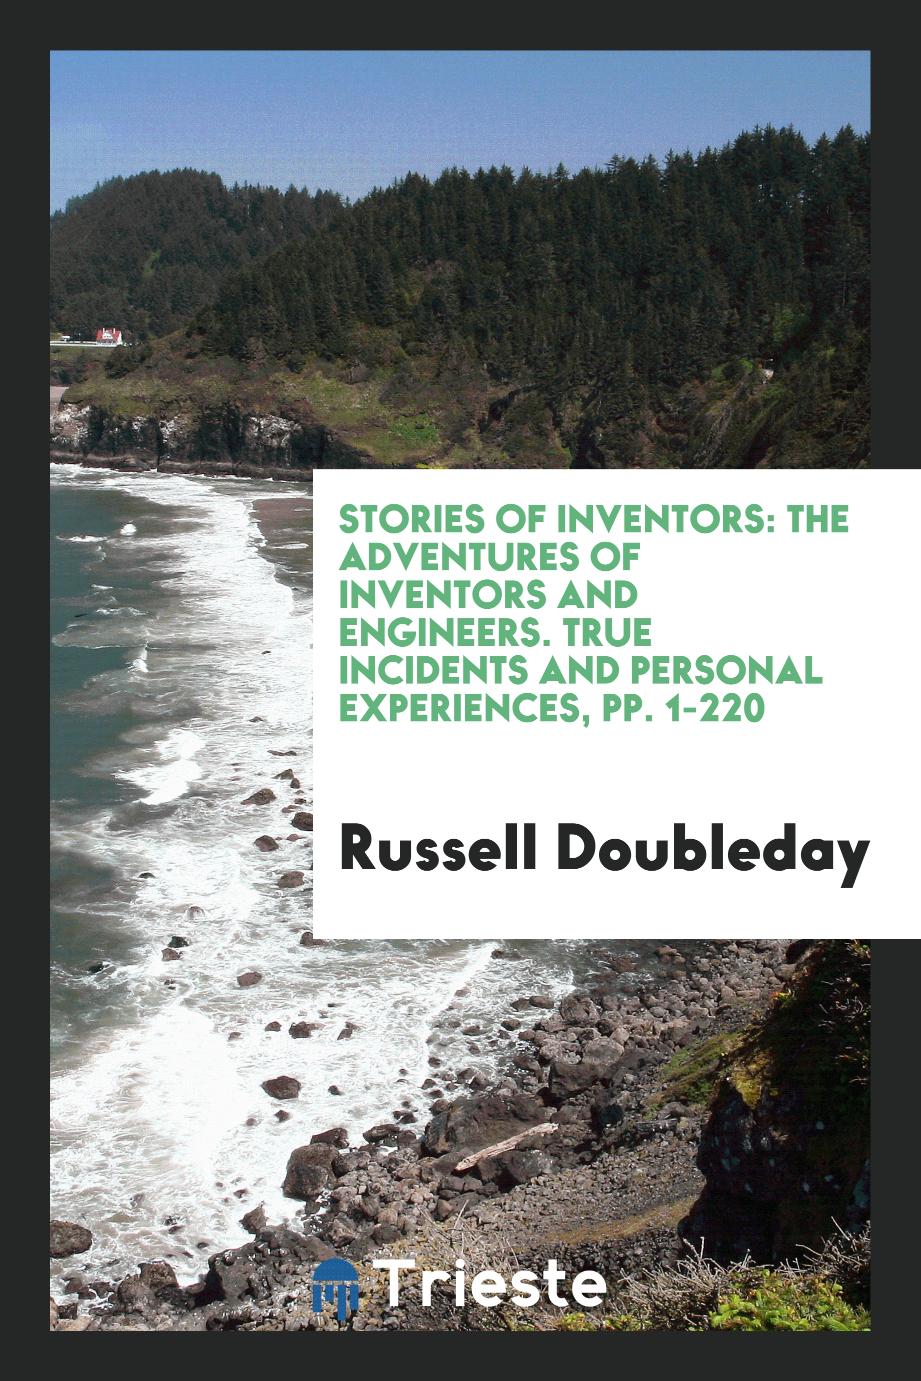 Stories of Inventors: The Adventures Of Inventors And Engineers. True Incidents And Personal Experiences, pp. 1-220